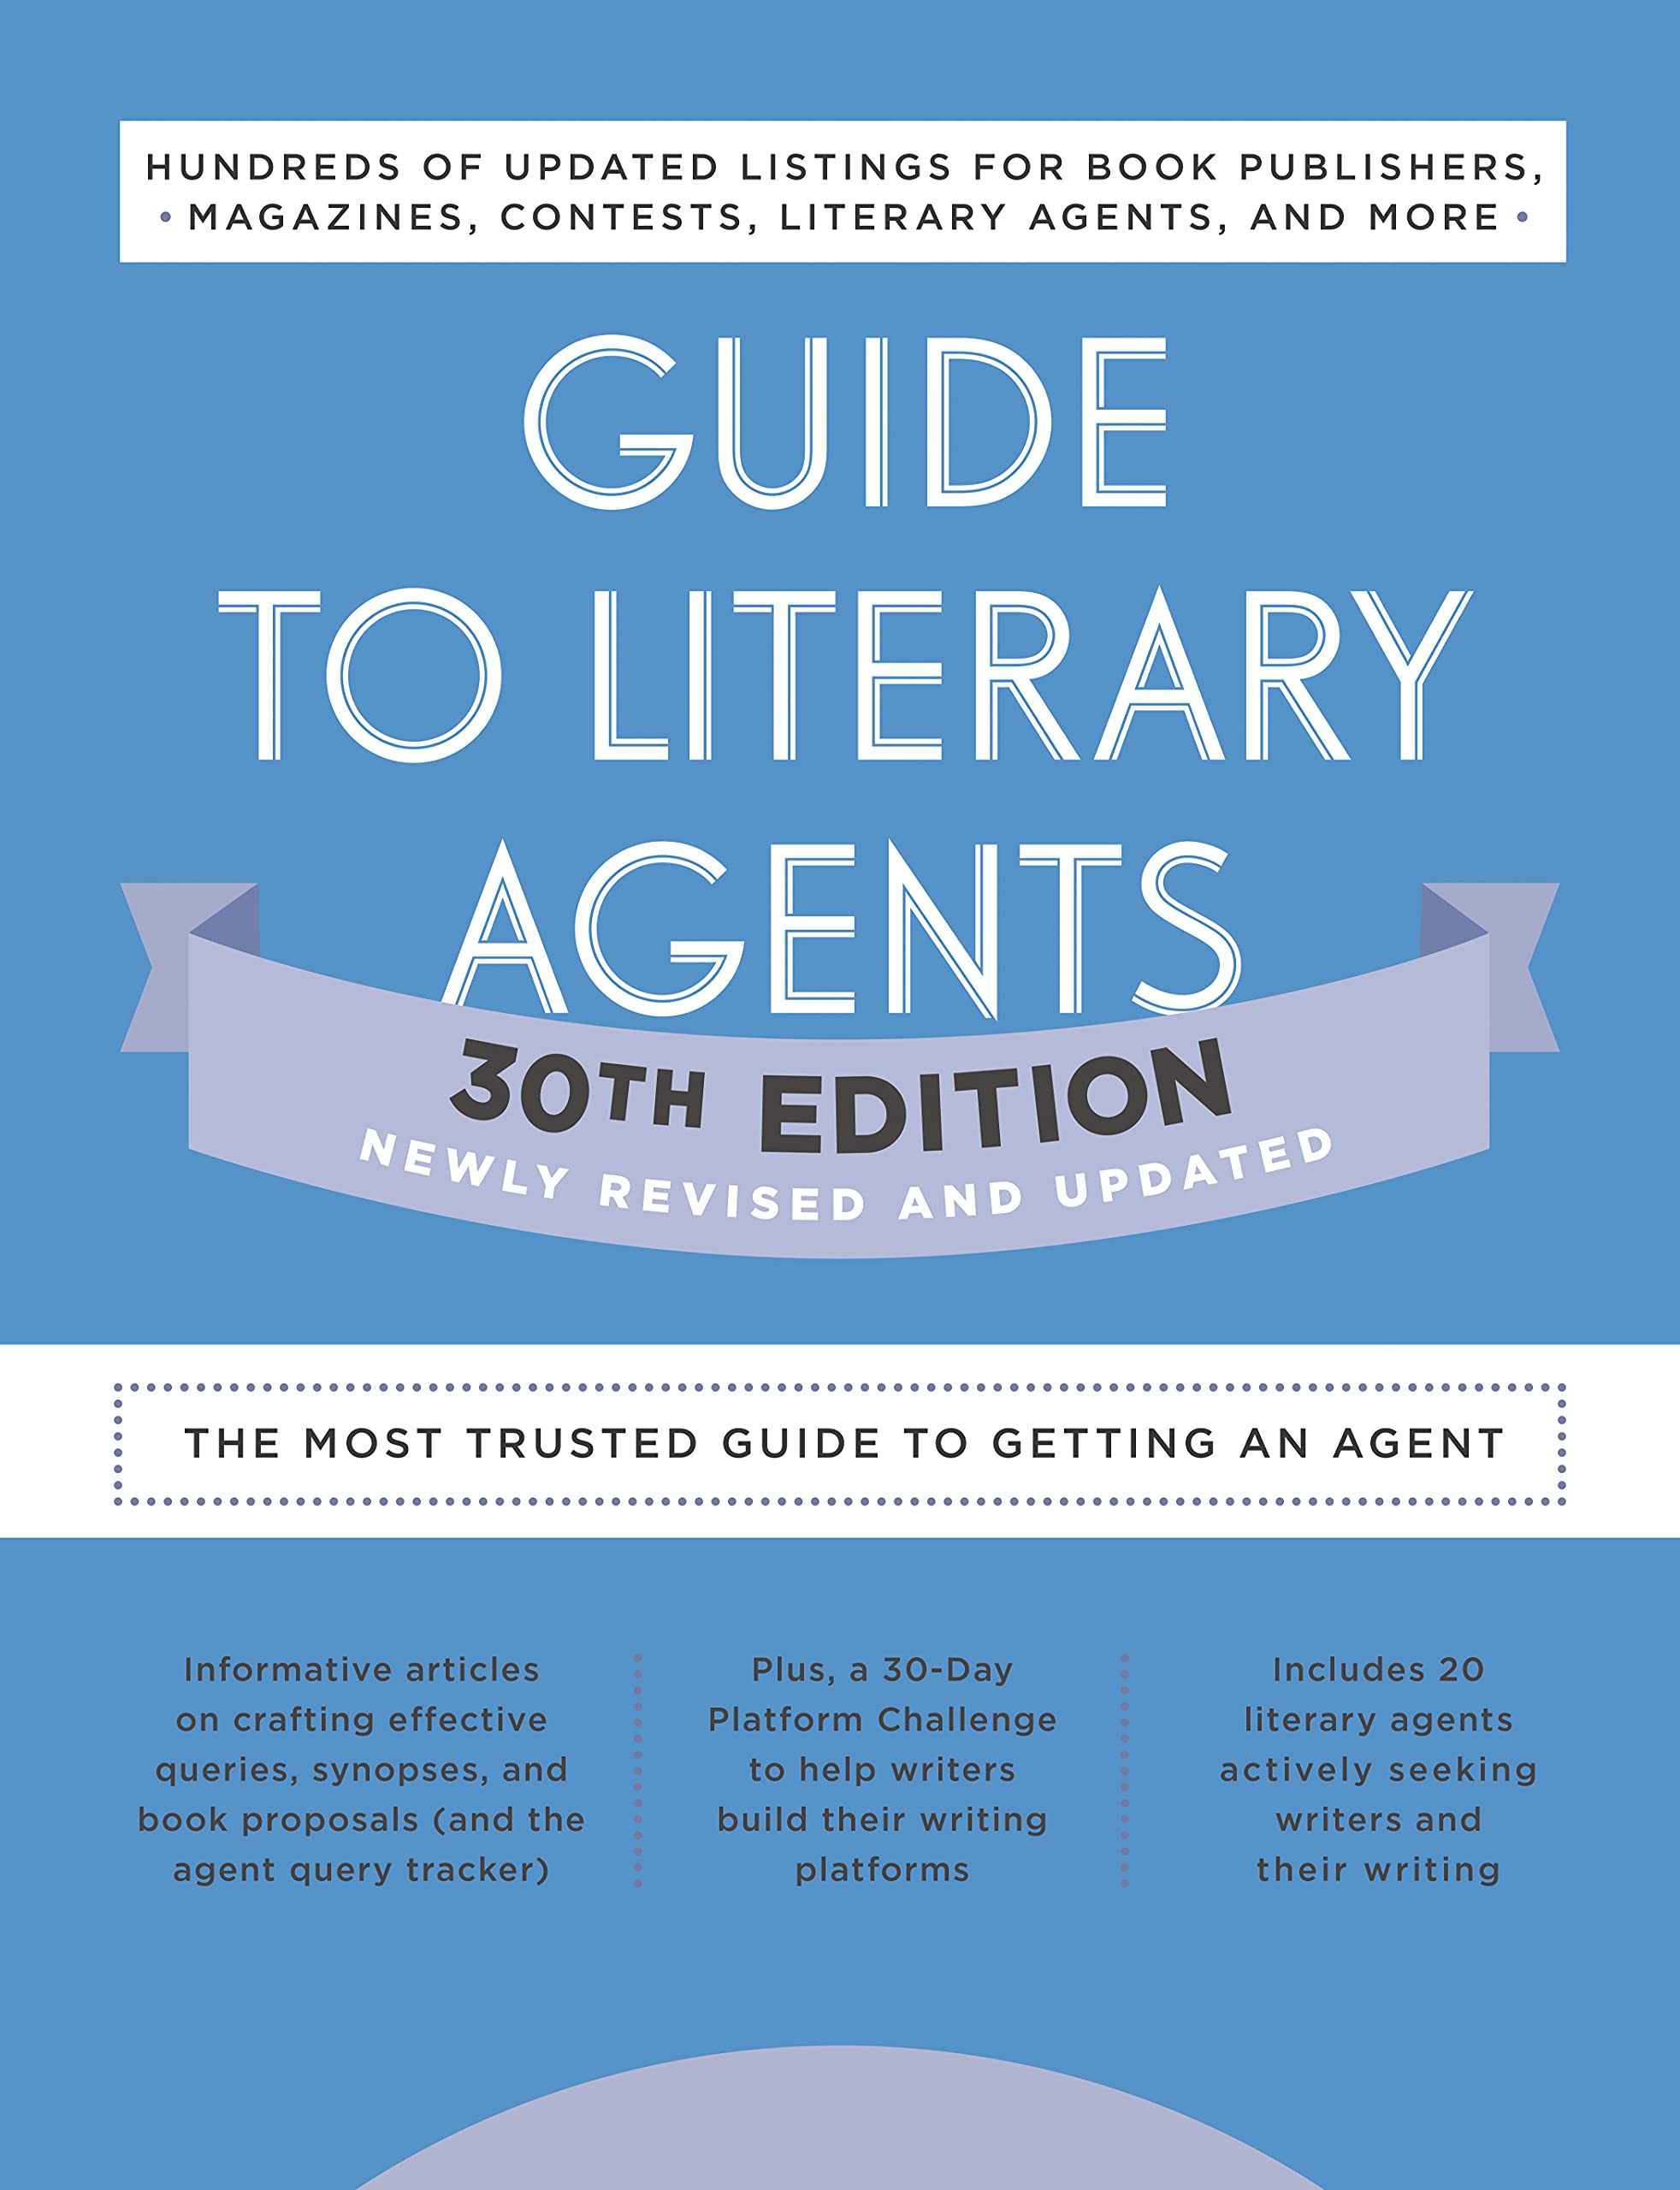 Guide to Literary Agents 30th Edition - SureShot Books Publishing LLC